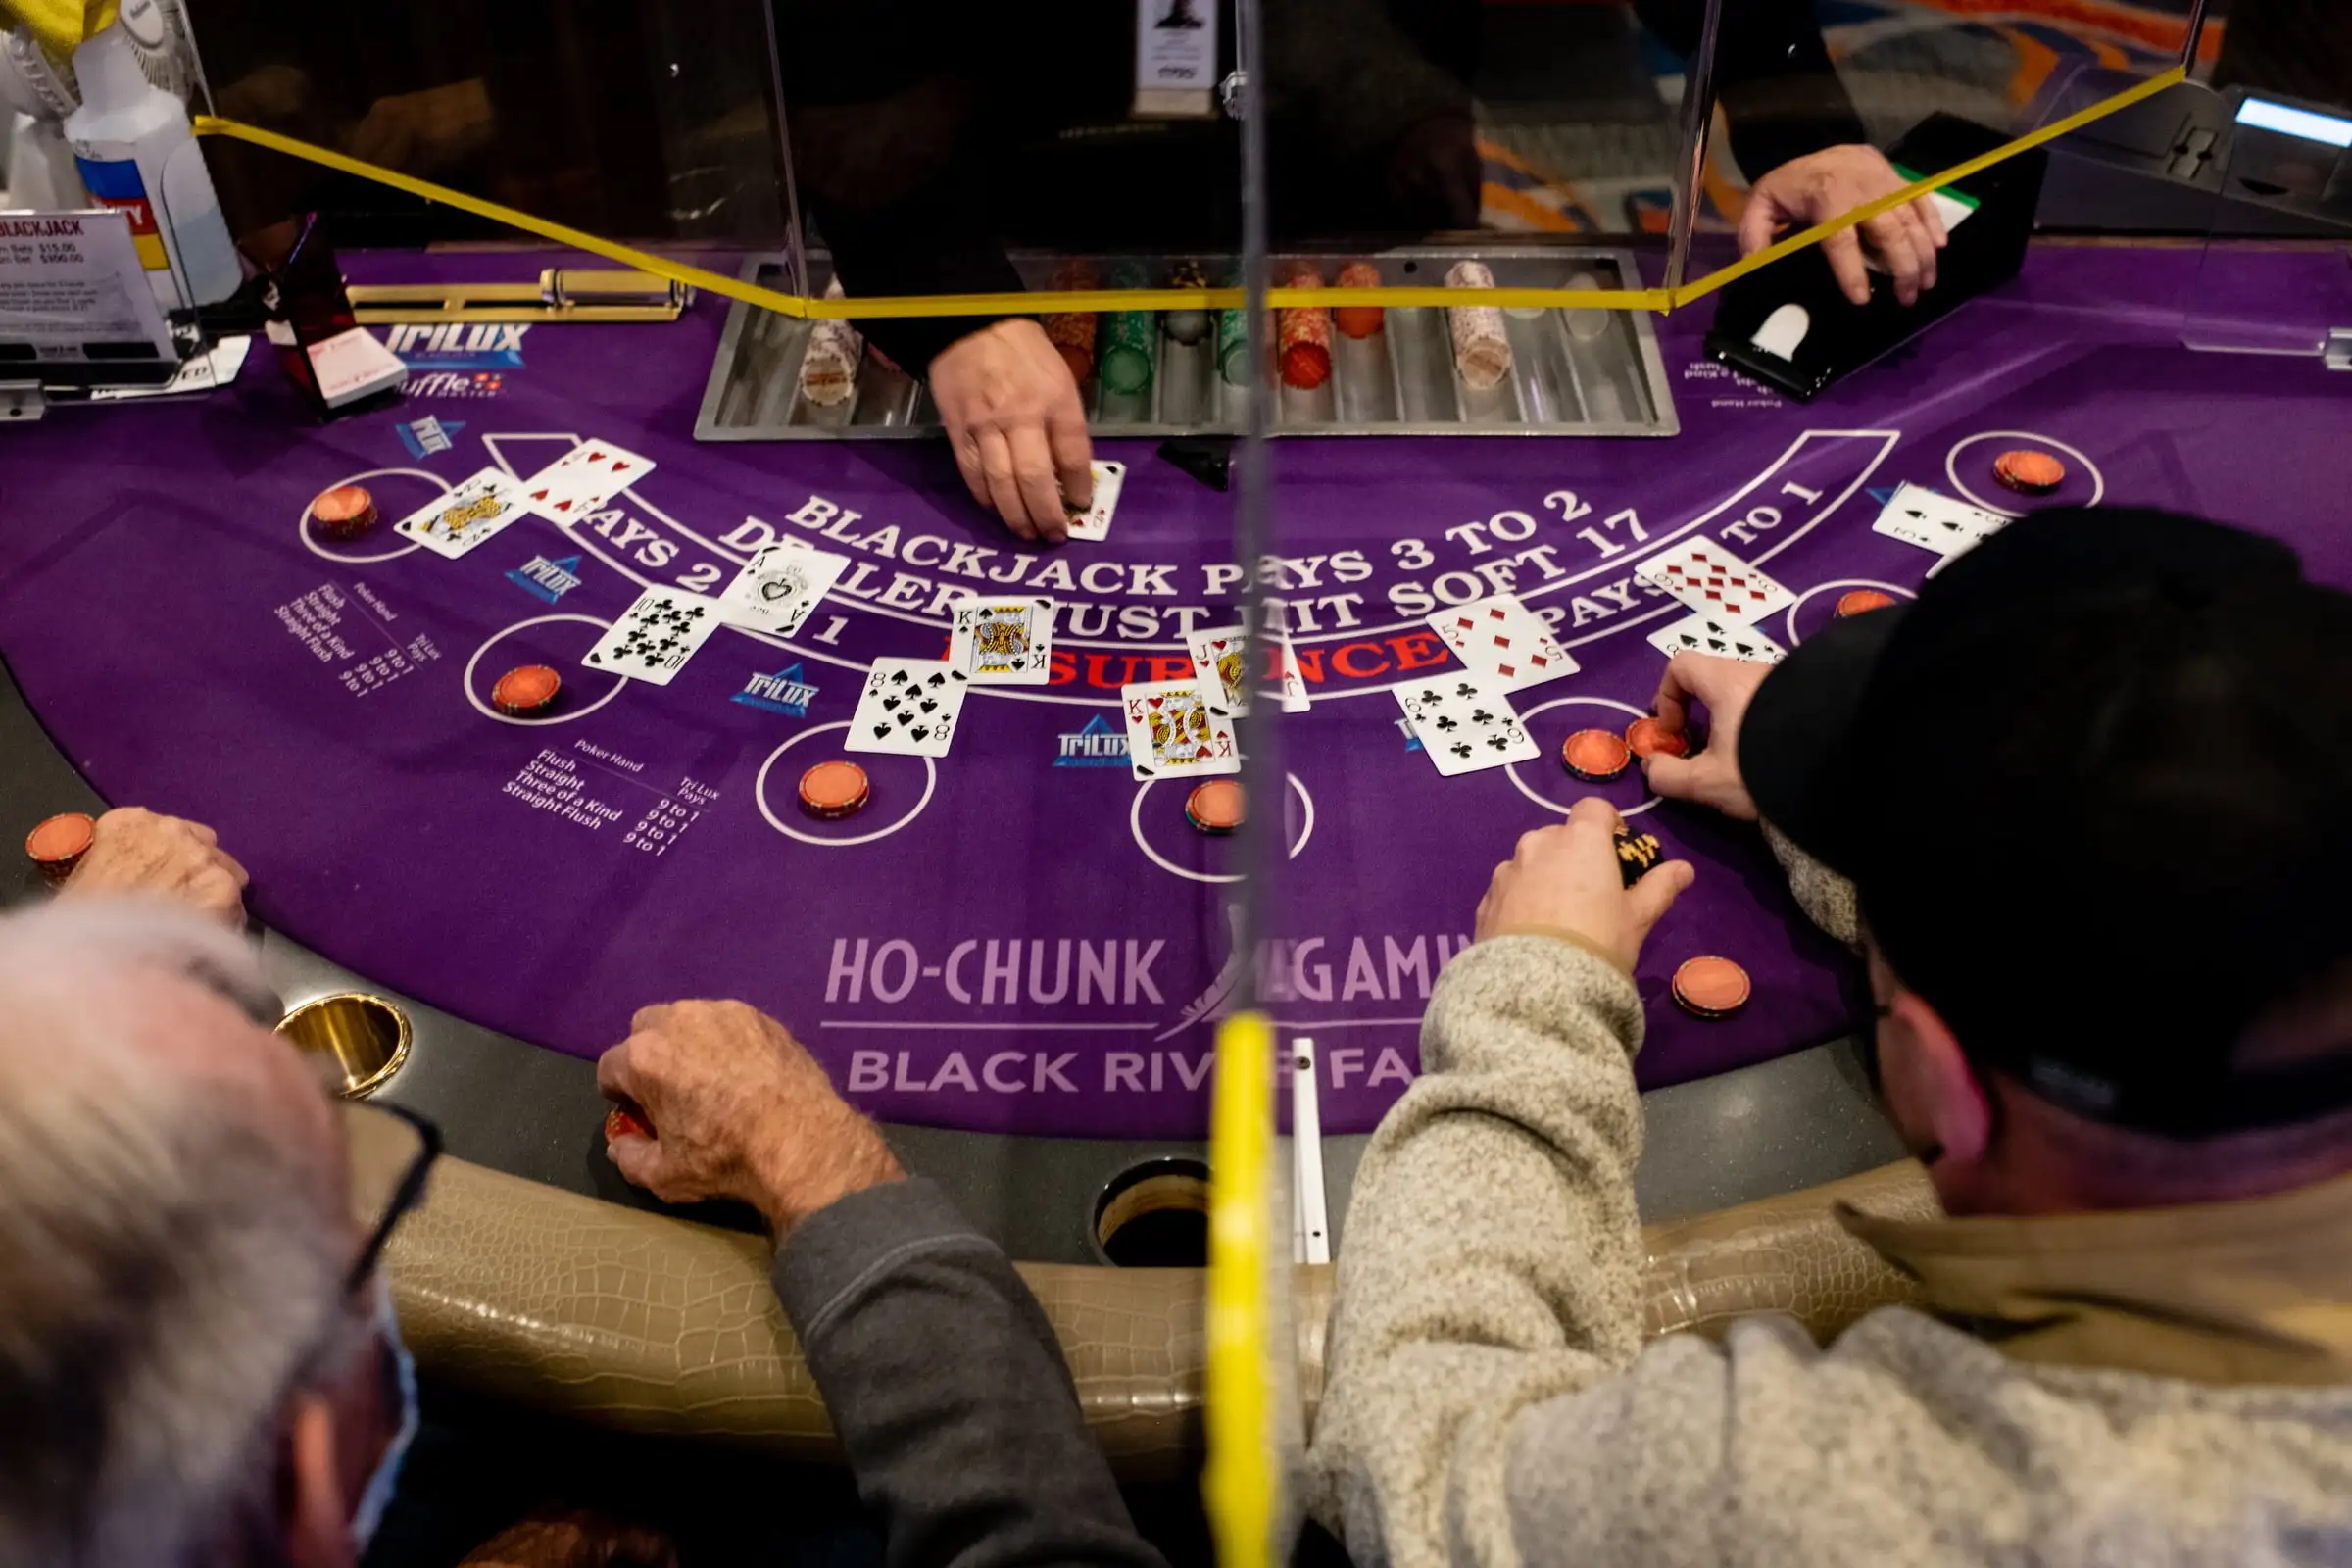 A blackjack table is seen at Ho-Chunk Gaming Black River Falls in Black River Falls, Wis., on Feb. 9, 2022. “When we see anything less profitable, there’s a thought of, ‘Is it worth it?’”, said Ho-Chunk Nation President Marlon WhiteEagle of his tribe’s investment in casinos. (Ilana Bar-av for Wisconsin Watch)